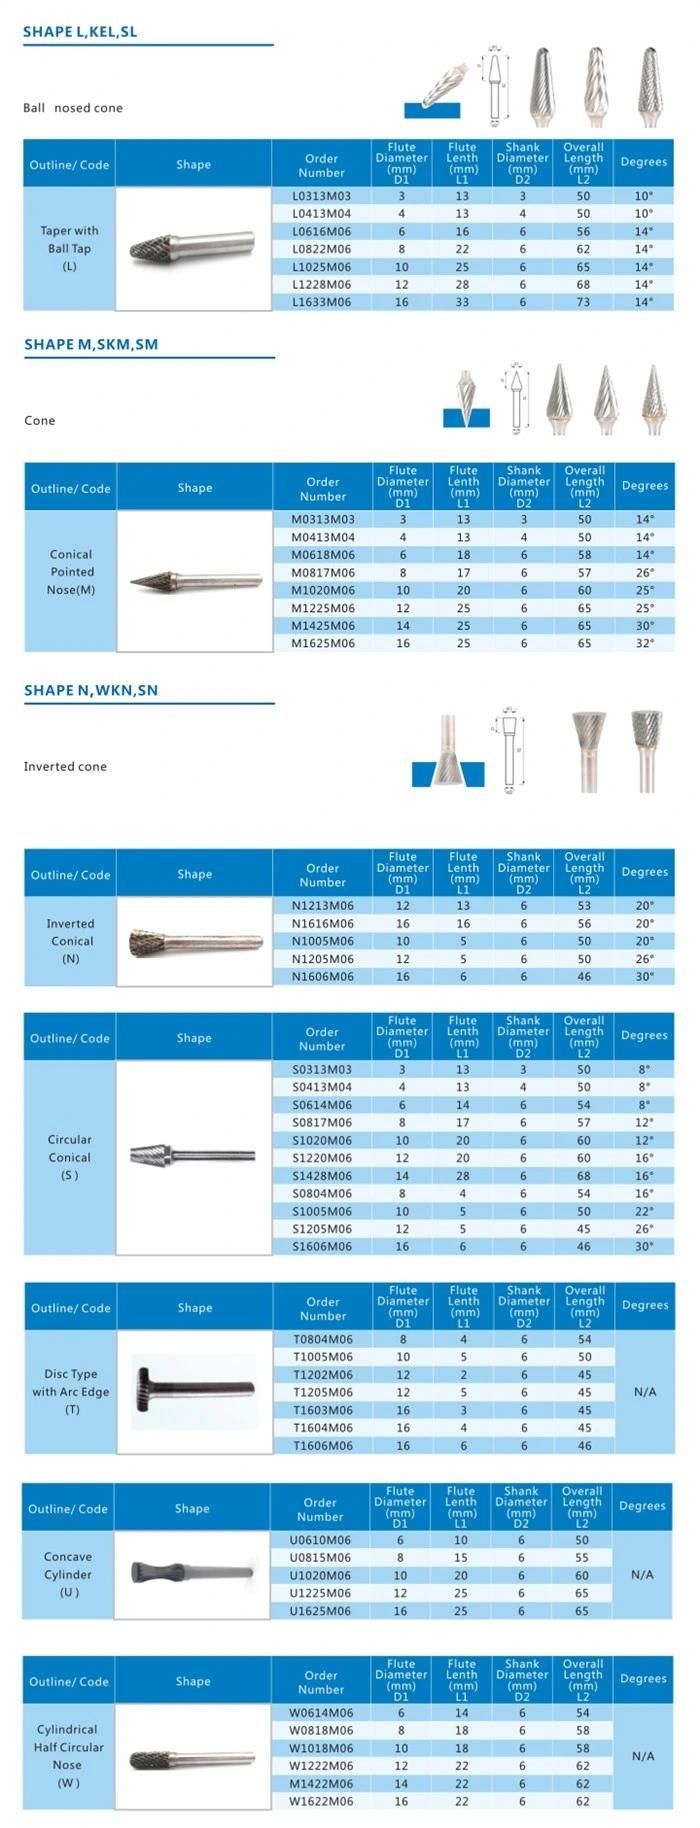 Tungsten Carbide Burrs Carbide Rotary Files Rotary Burrs with Inch Sizes for Wood Cutting